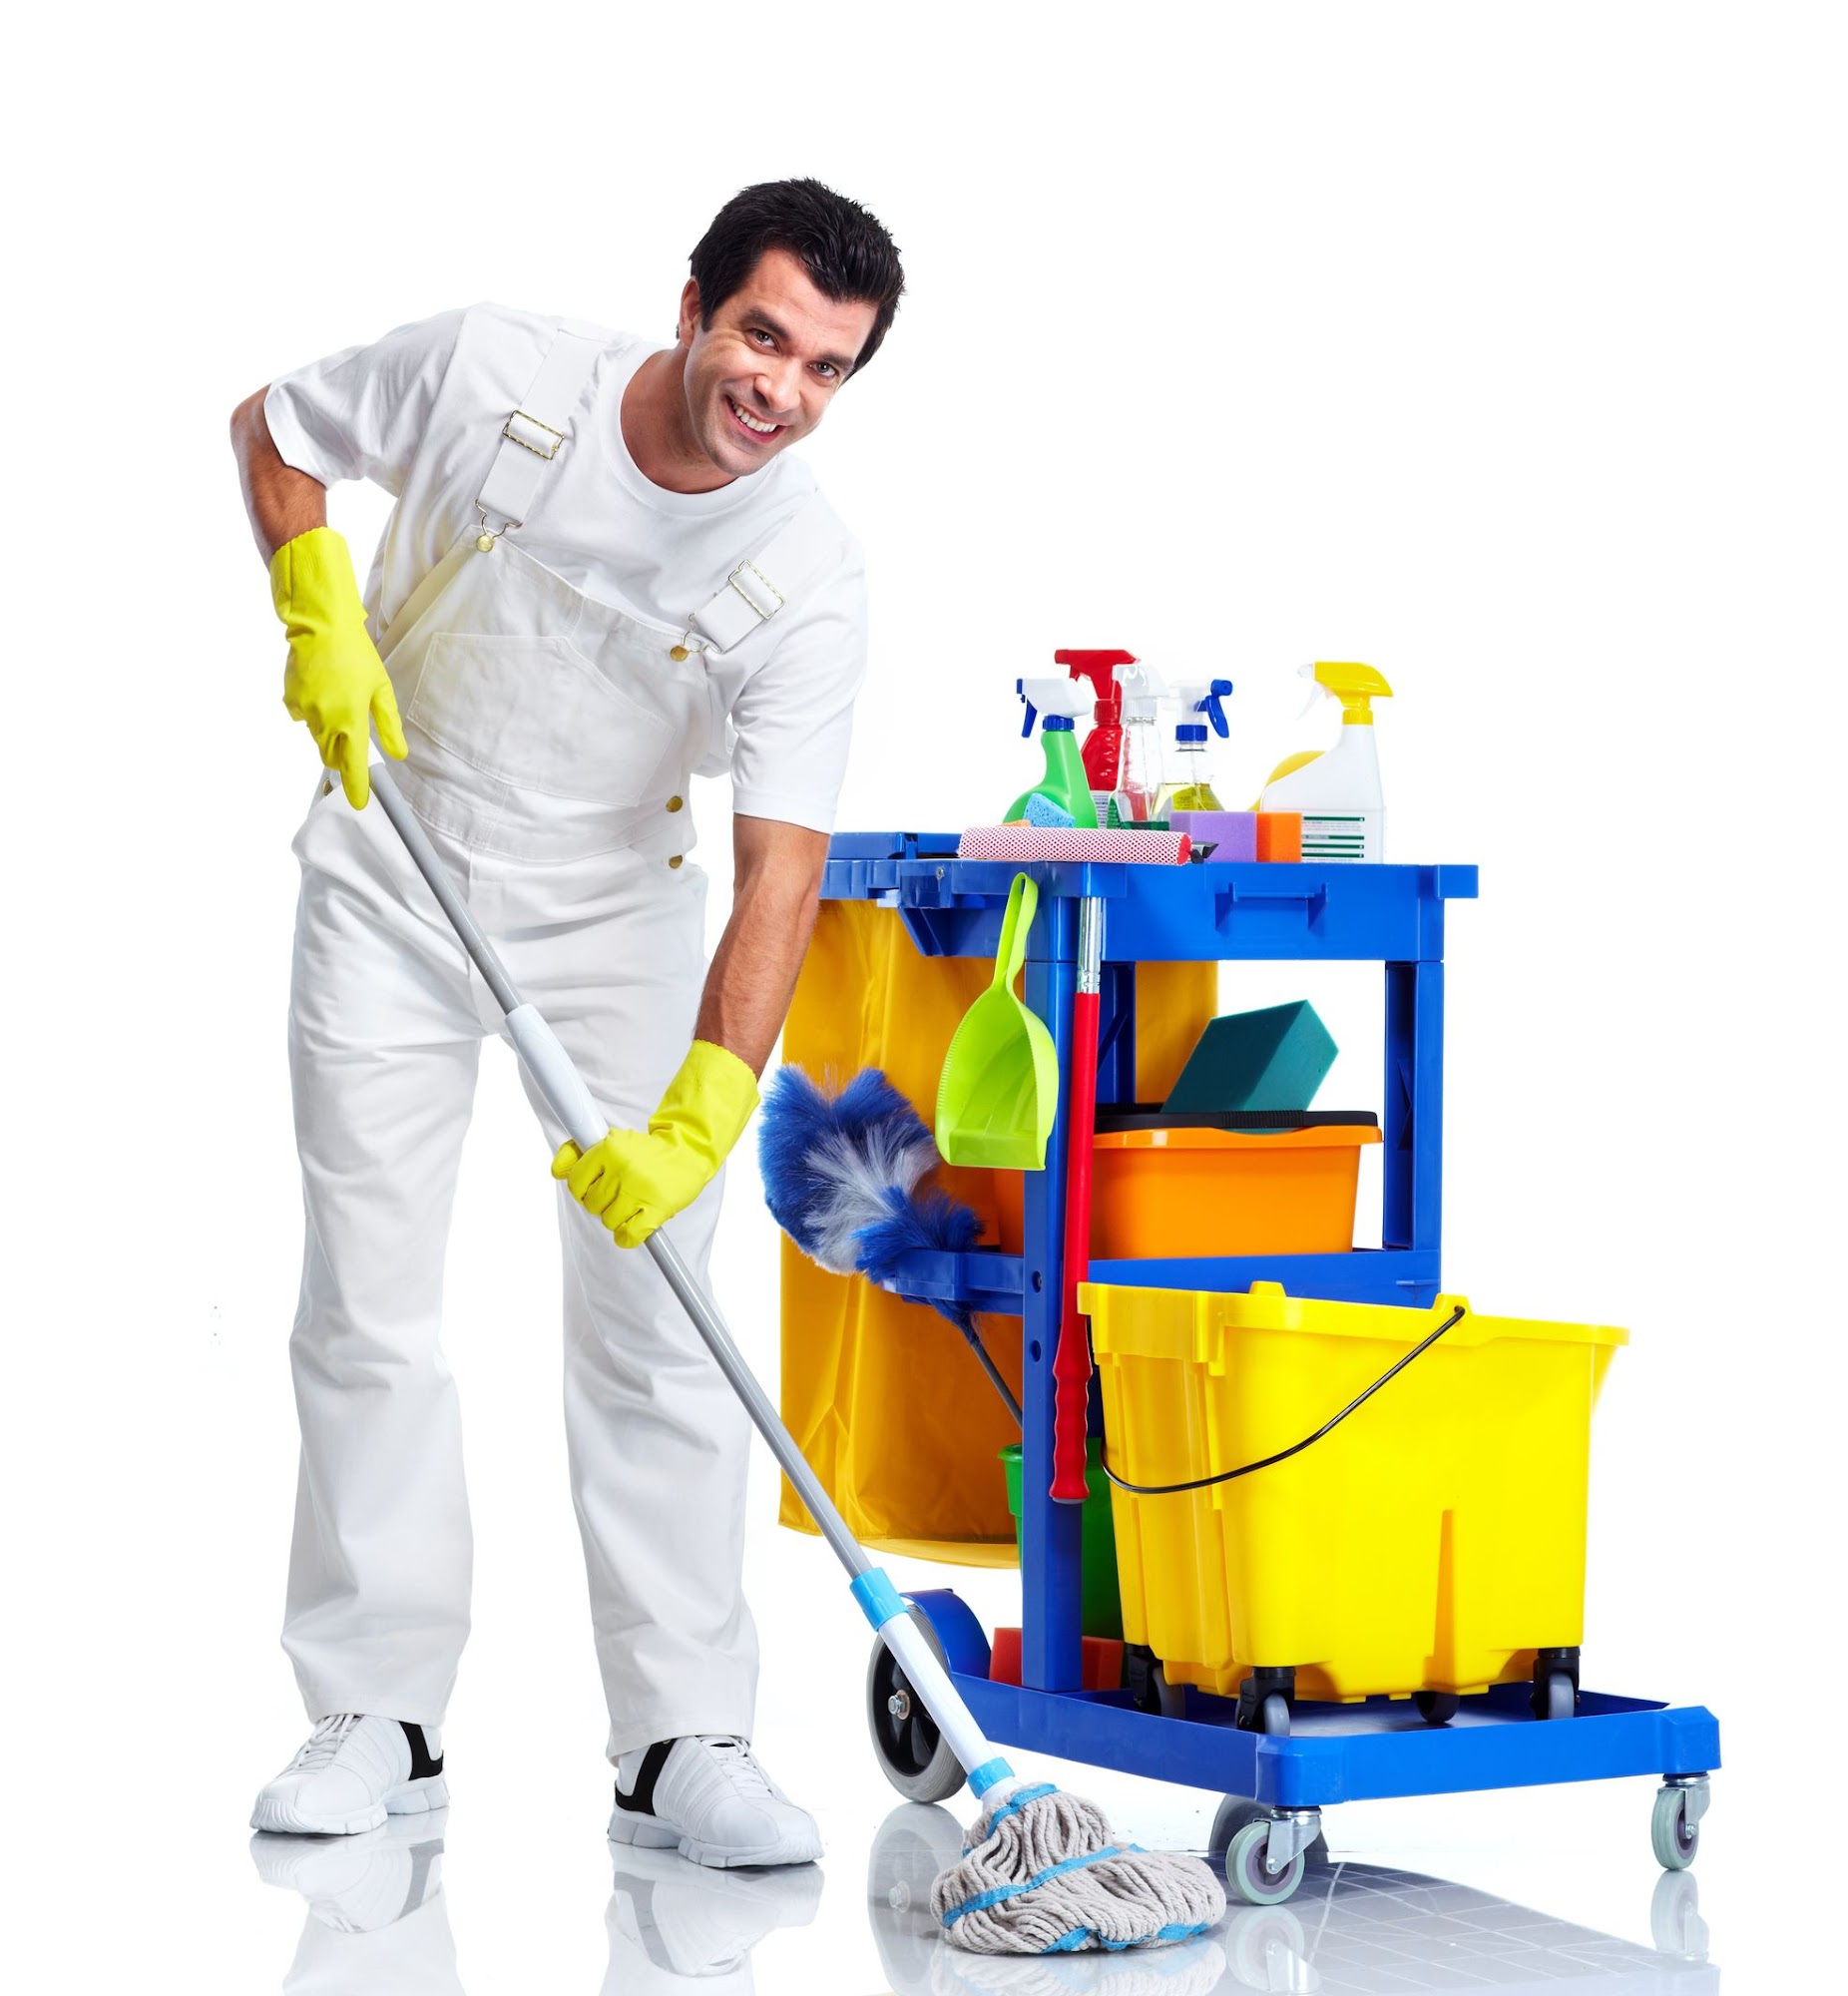 LCS cleaning solutions 331 S Main St, Bangor Pennsylvania 18013